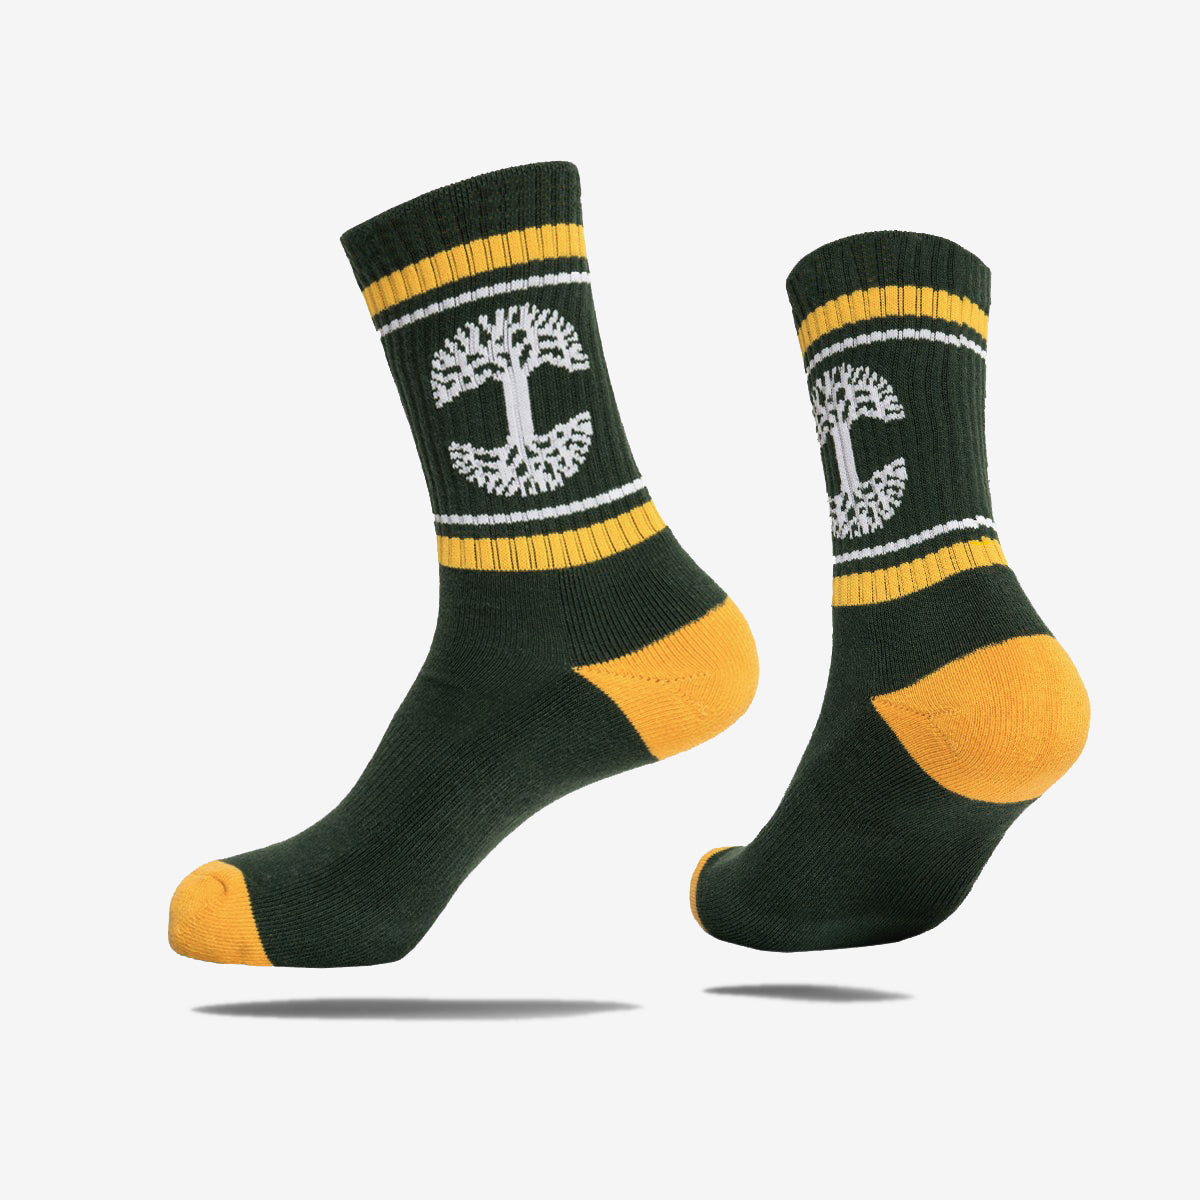 Forest green crew socks with yellow heel and toe and white Oaklandish tree logo between yellow and white ankle stripes.